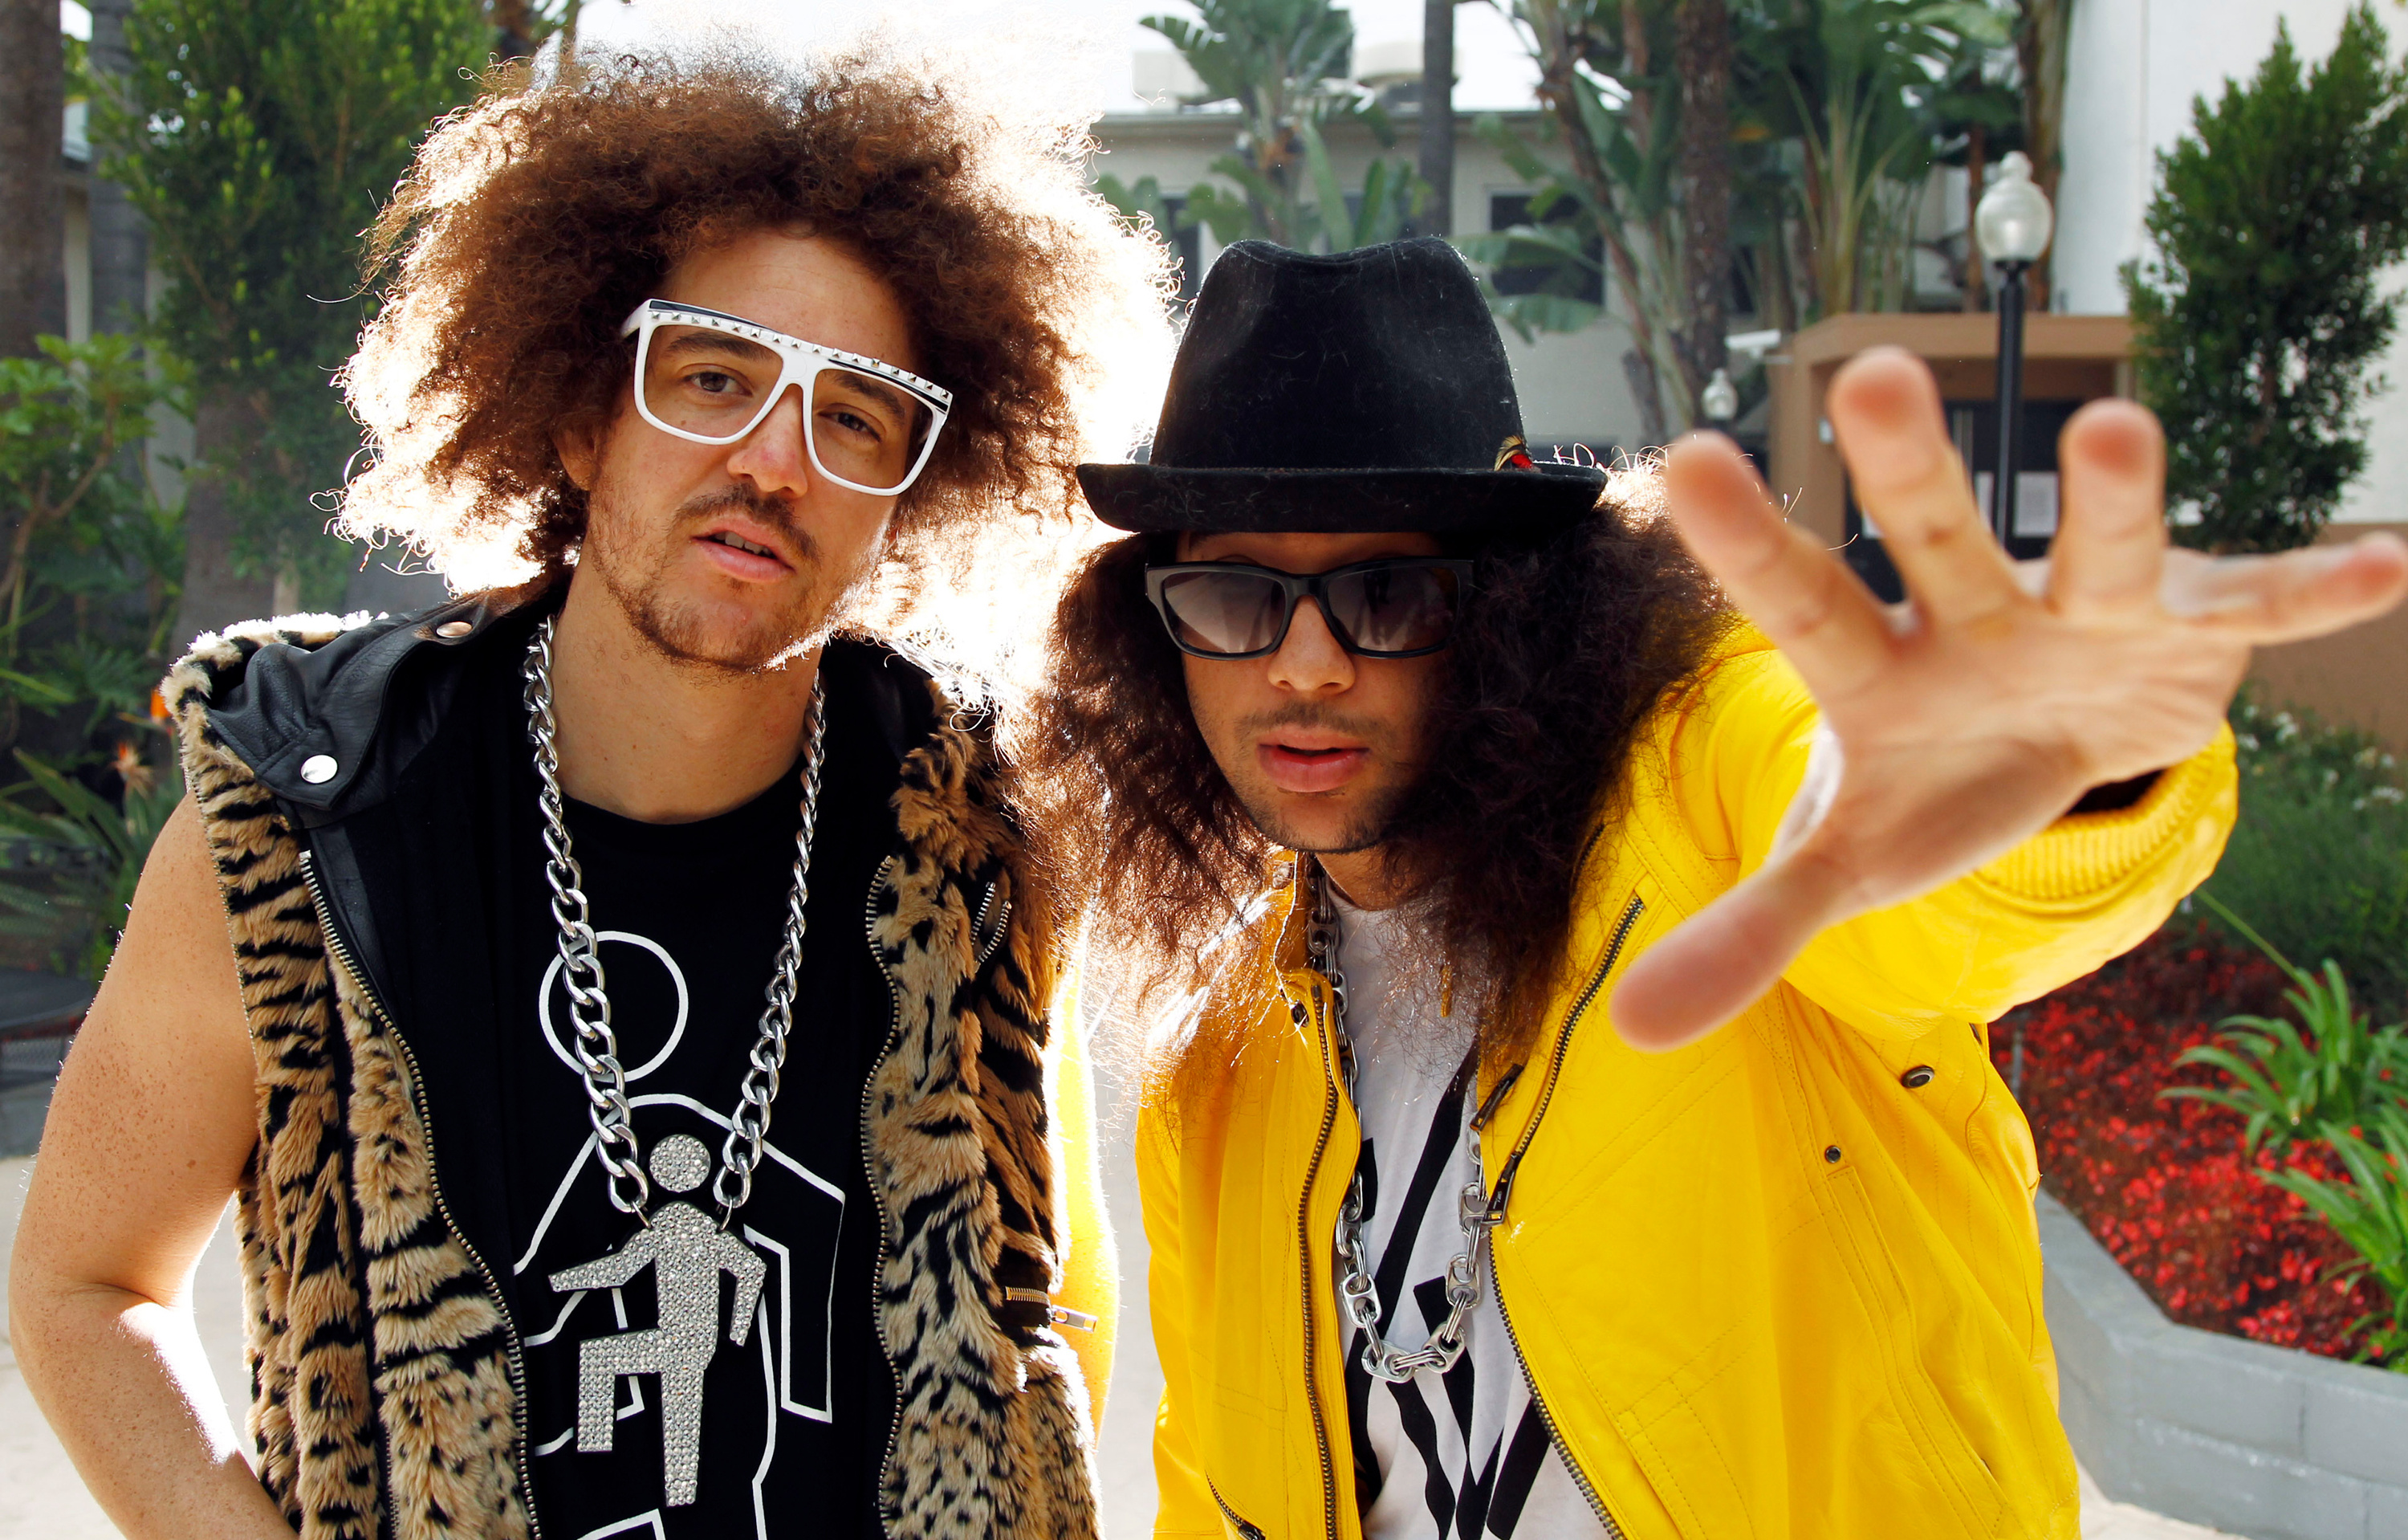 LMFAO wallpapers, Pop music passion, Dynamic energy, Party rock vibes, 3000x1920 HD Desktop